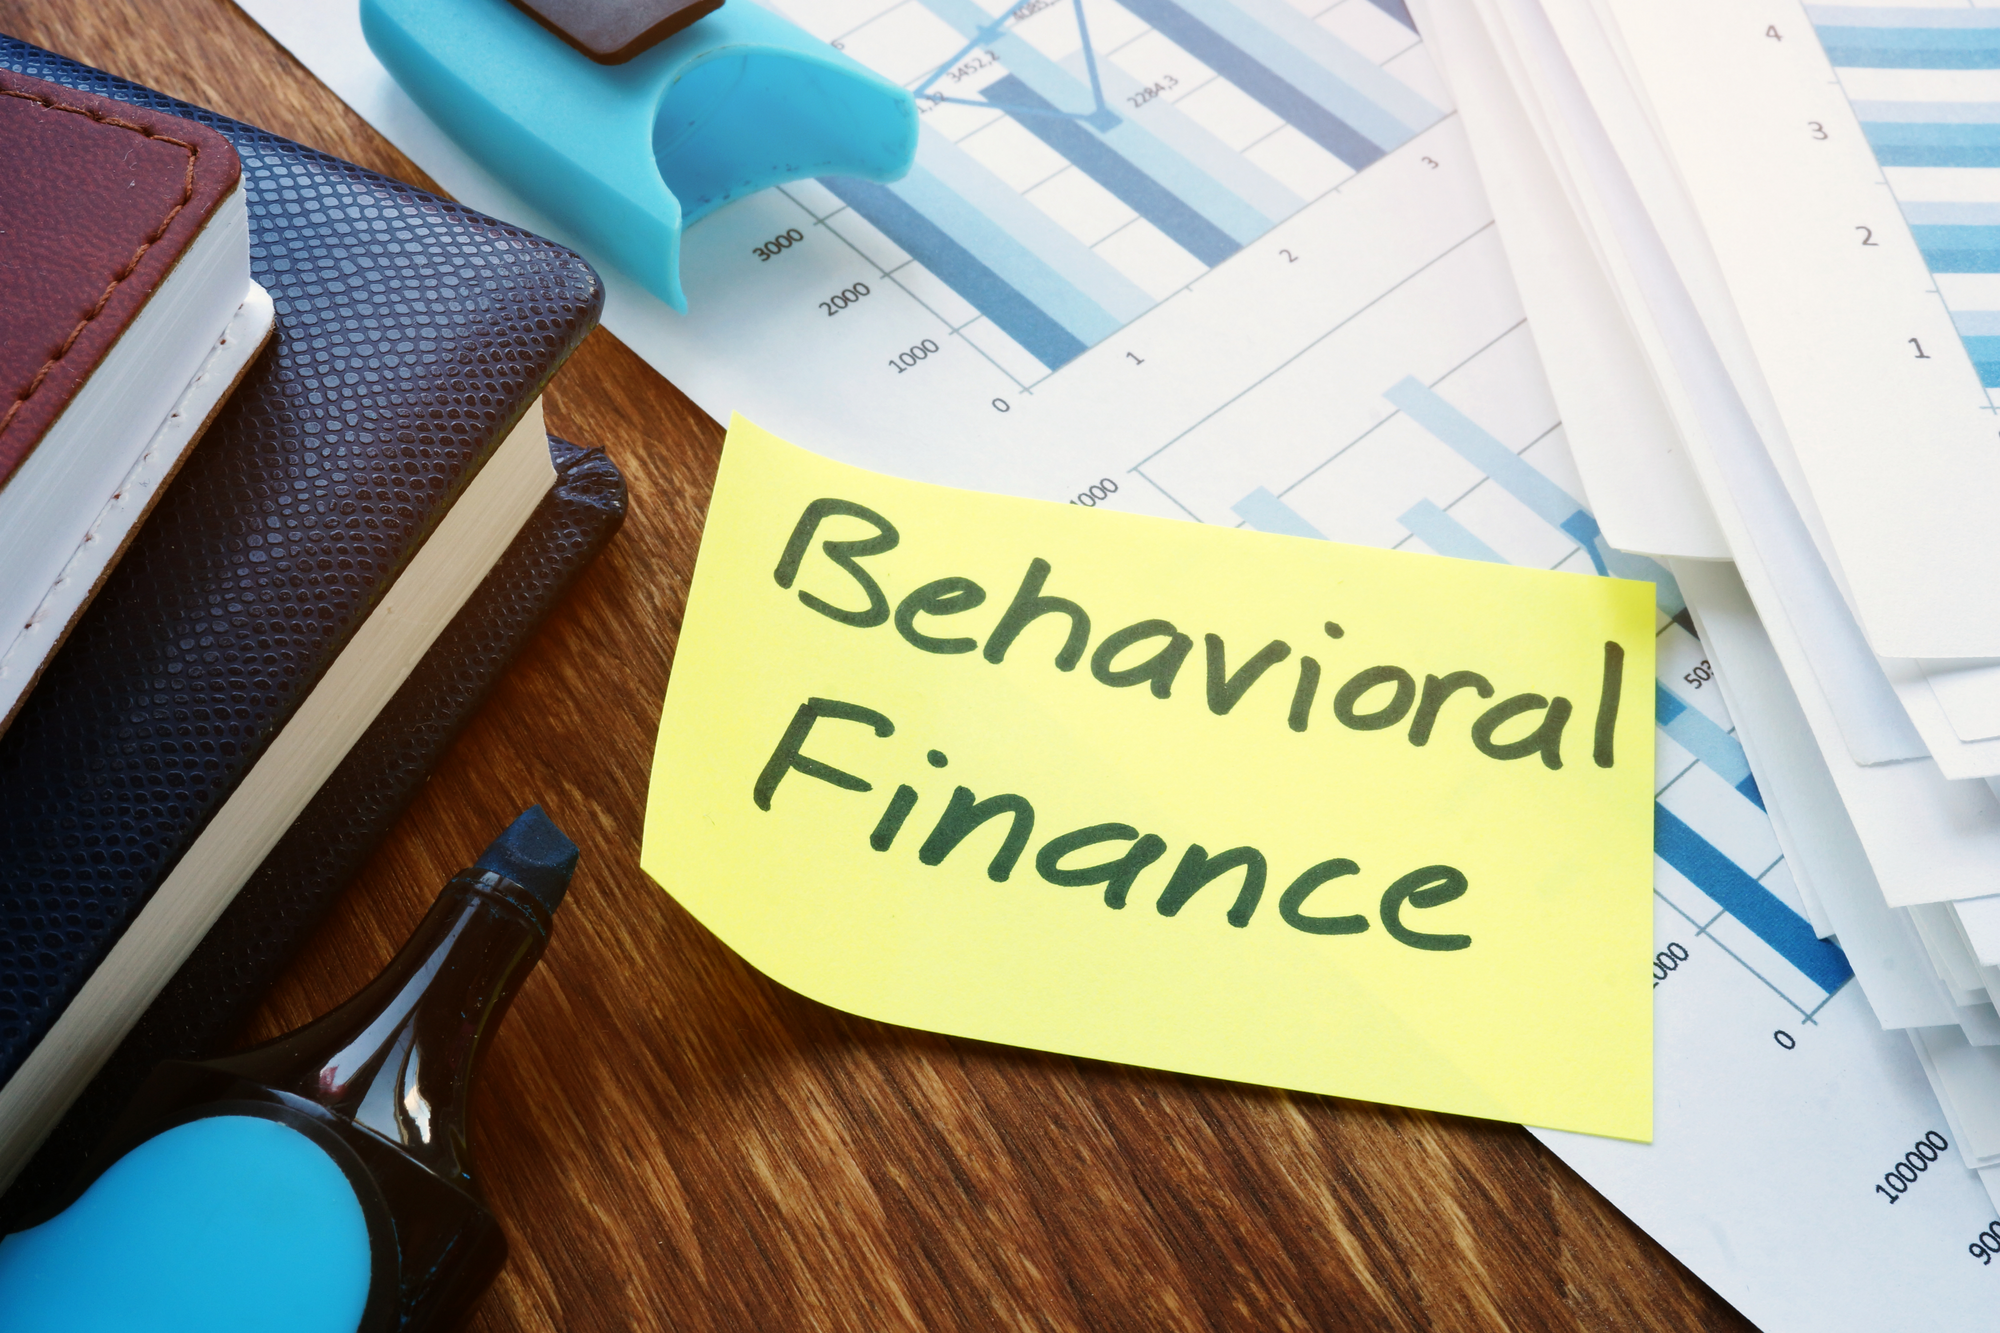 Behavioral Finance: Overview, Definition, Examples